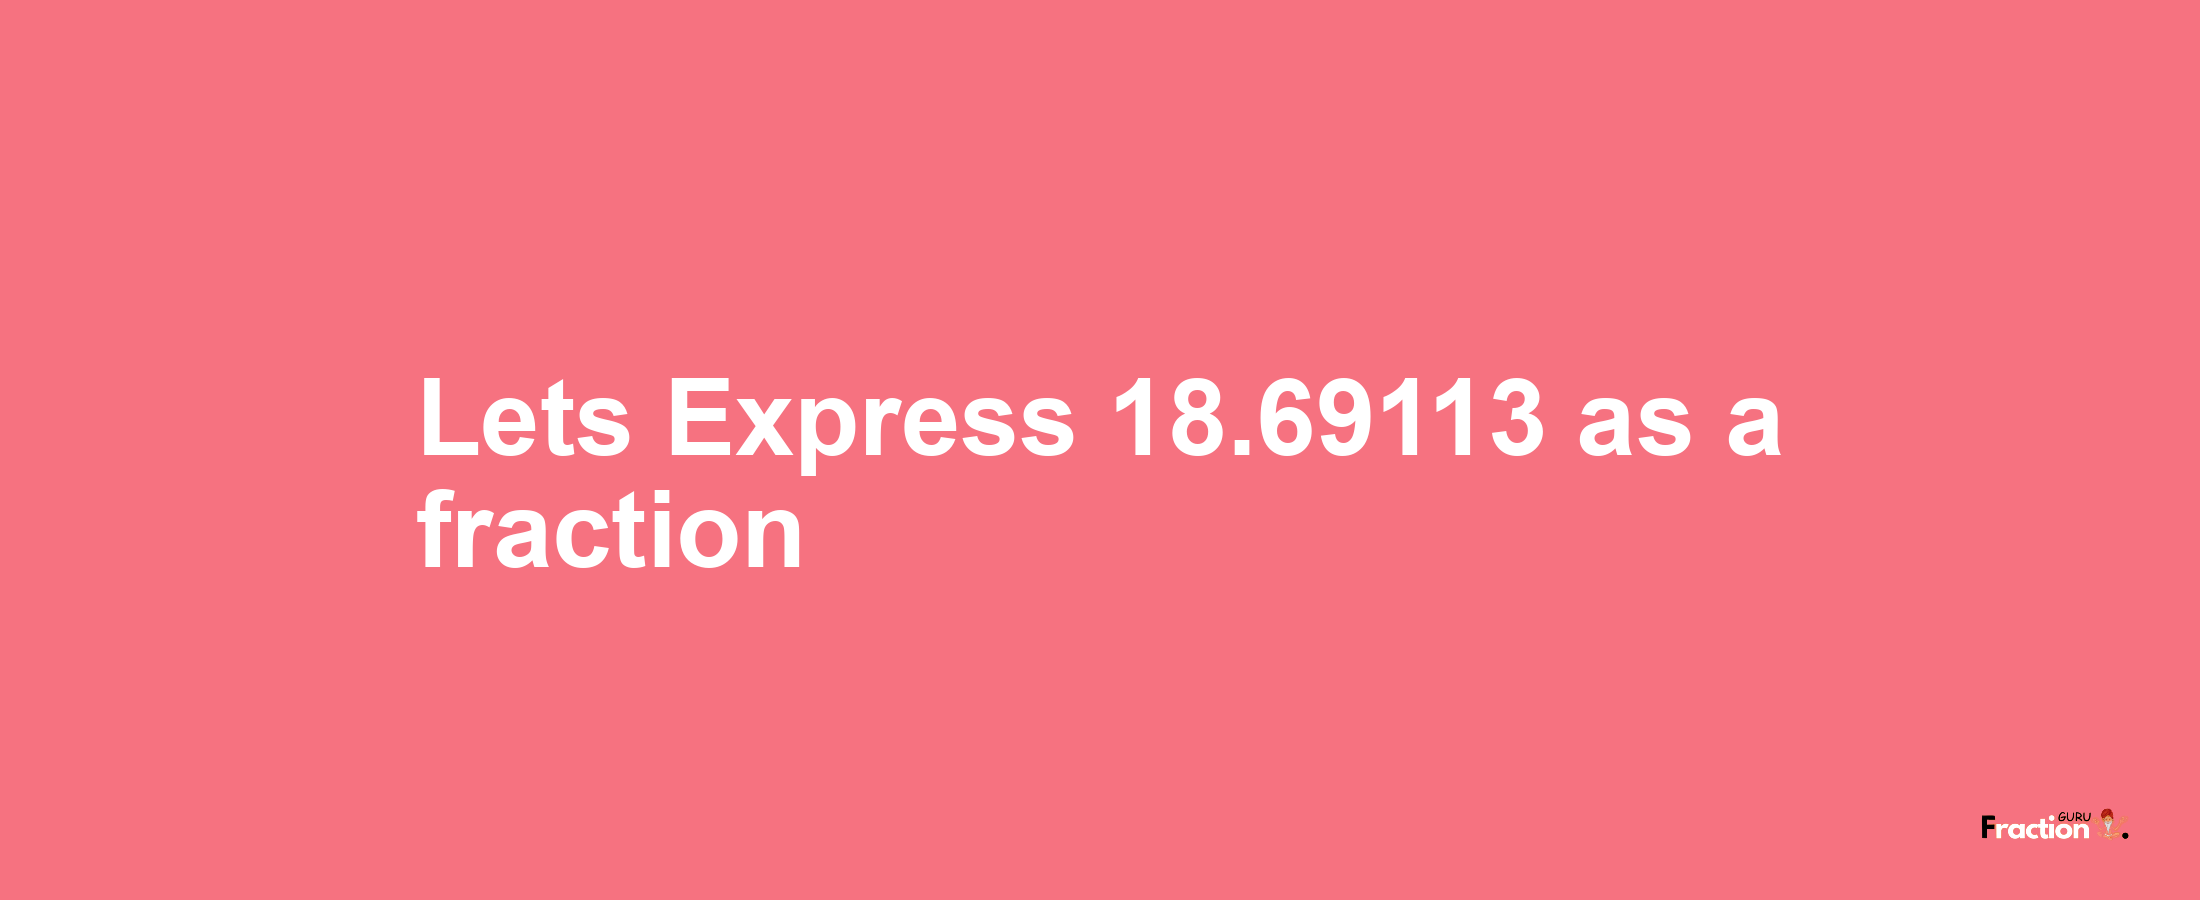 Lets Express 18.69113 as afraction